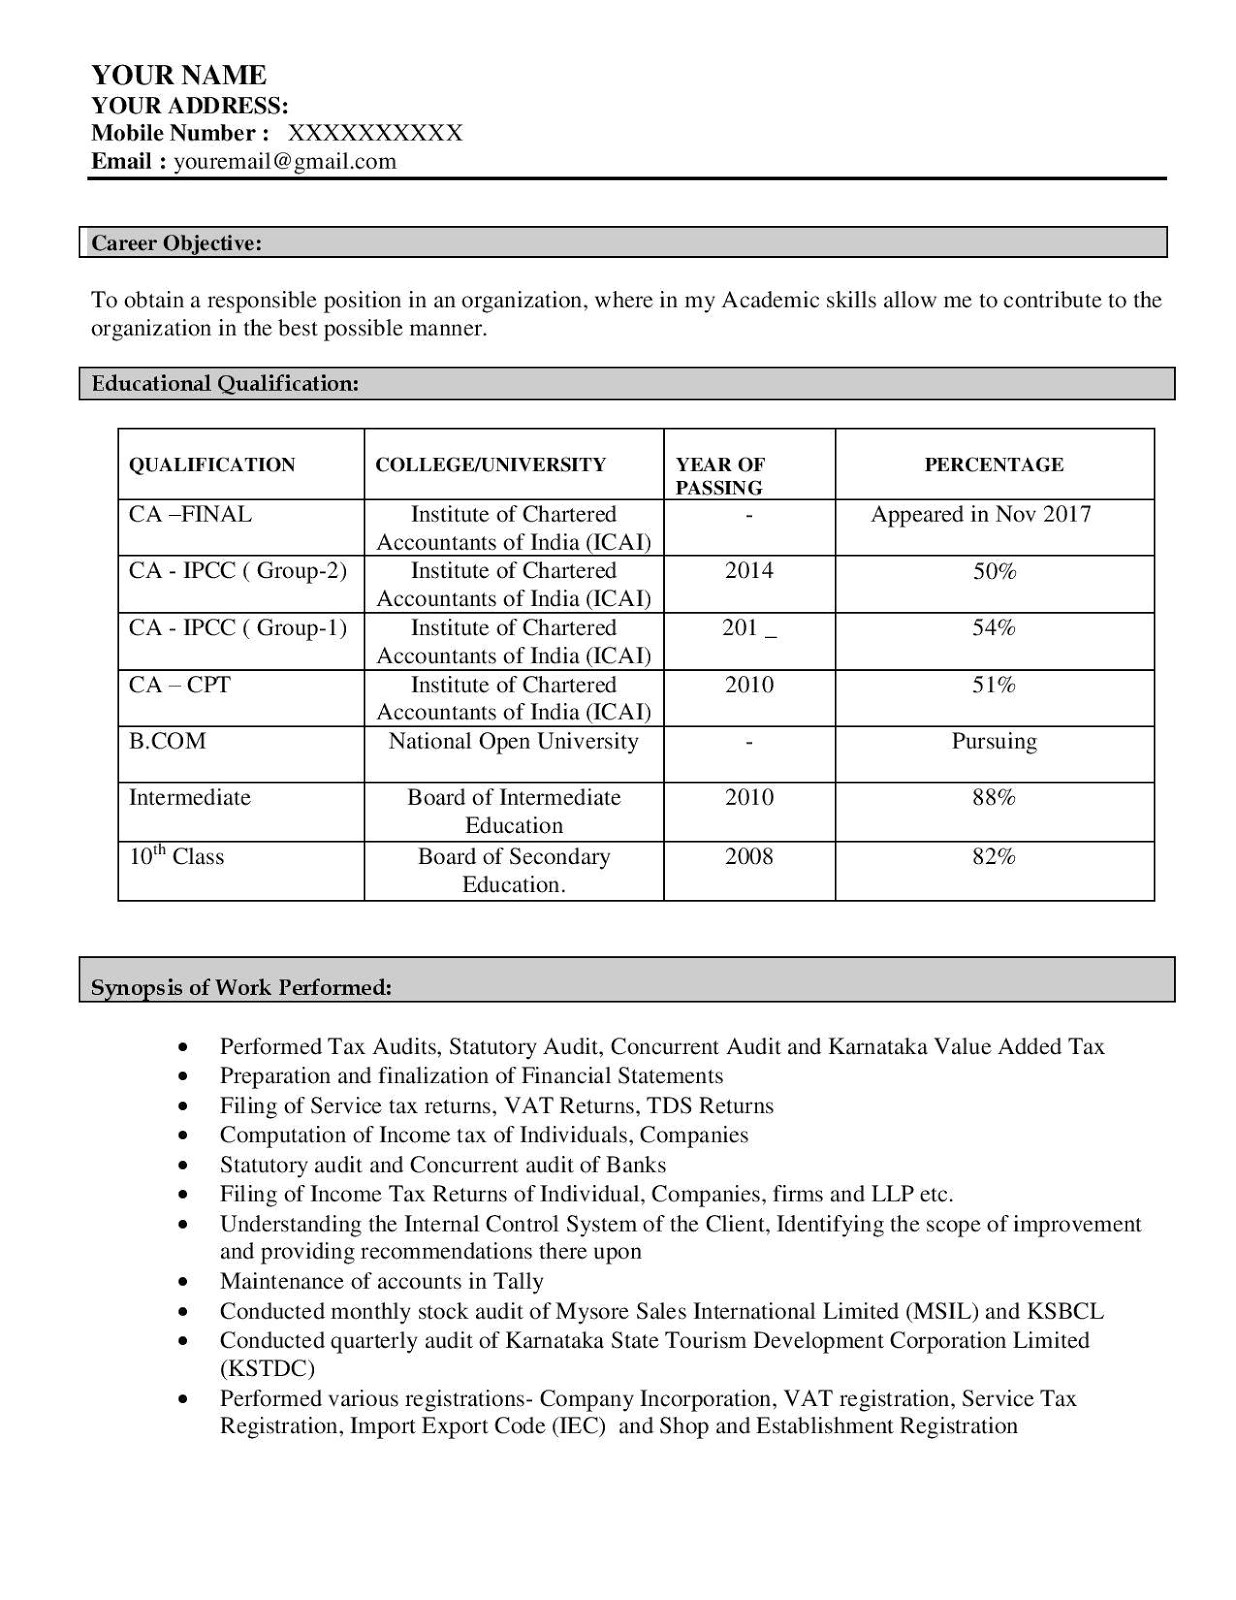 ca articleship resume sample example download in word